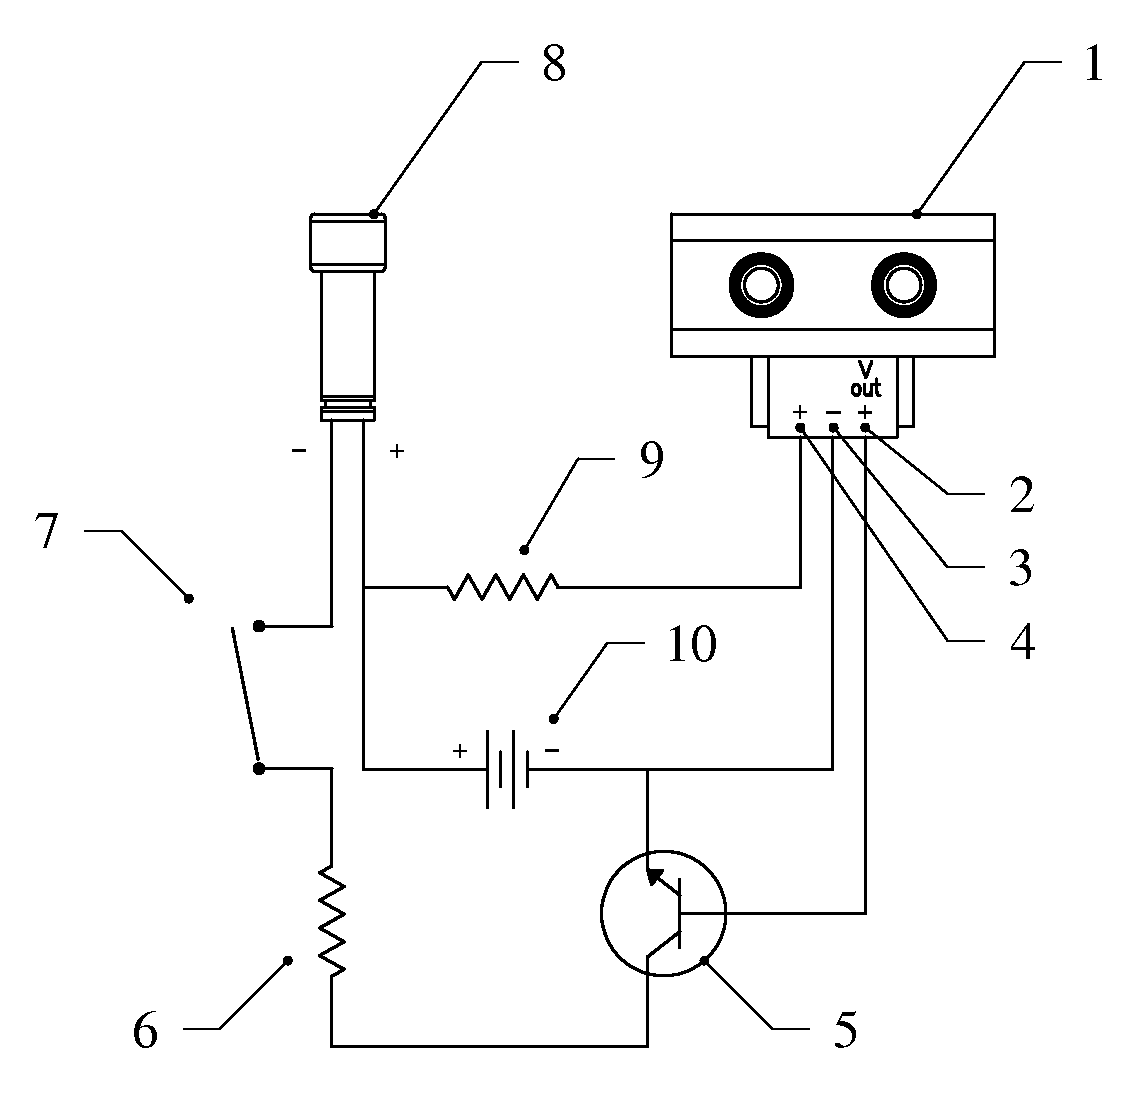 Personal Object Proximity Alerting Device